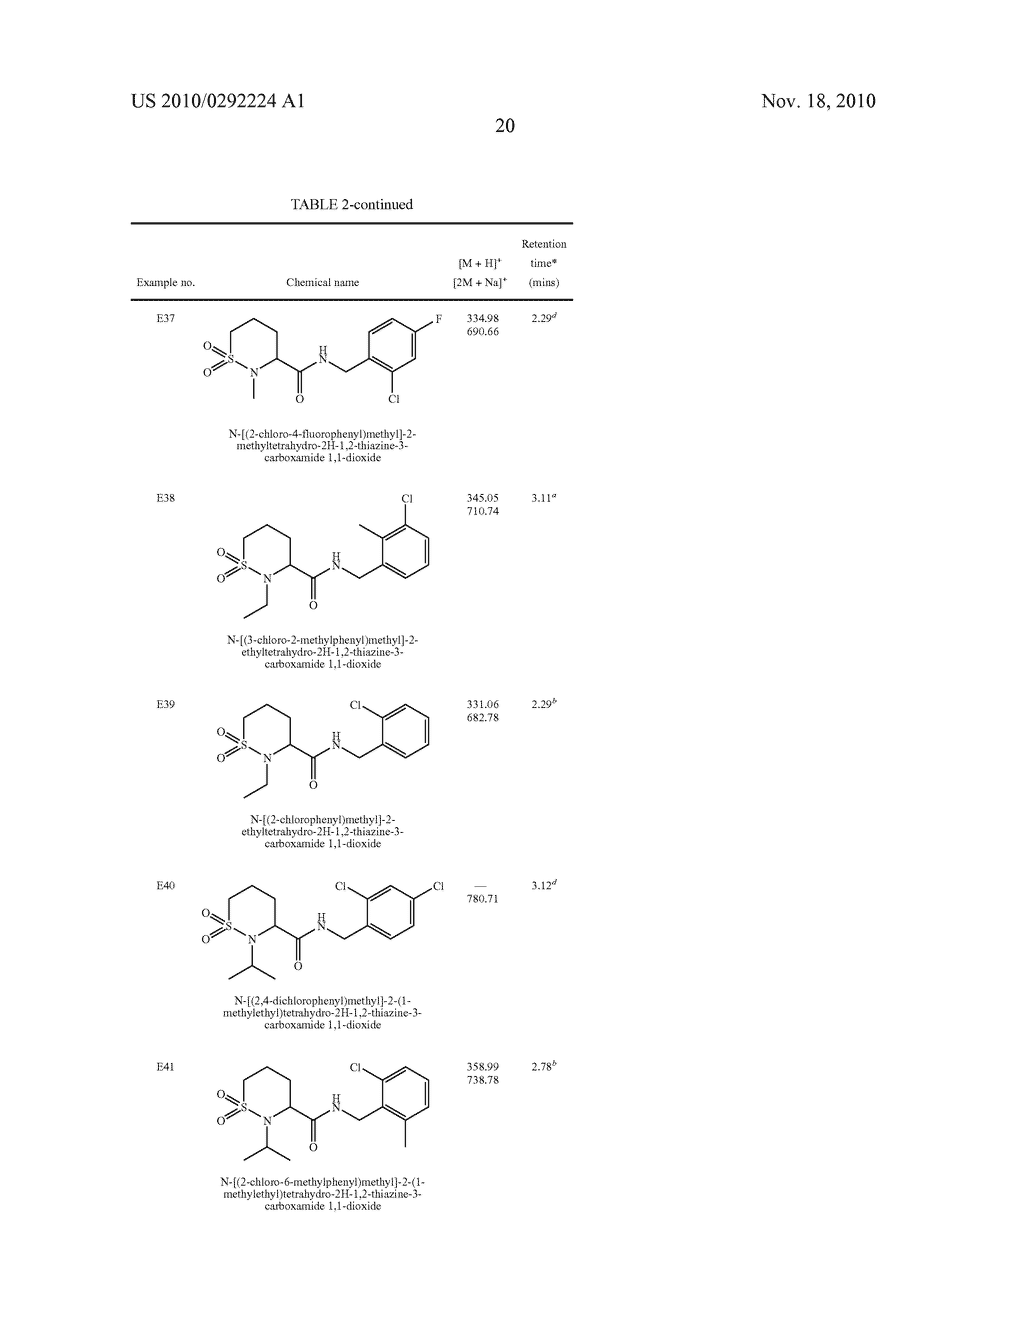 ISOTHIAZOLIDINE 1,1-DIOXIDE AND TETRAHYDRO-2H-1,2-THIAZINE 1,1-DIOXIDE DERIVATIVES AS P2X7 MODULATORS - diagram, schematic, and image 21